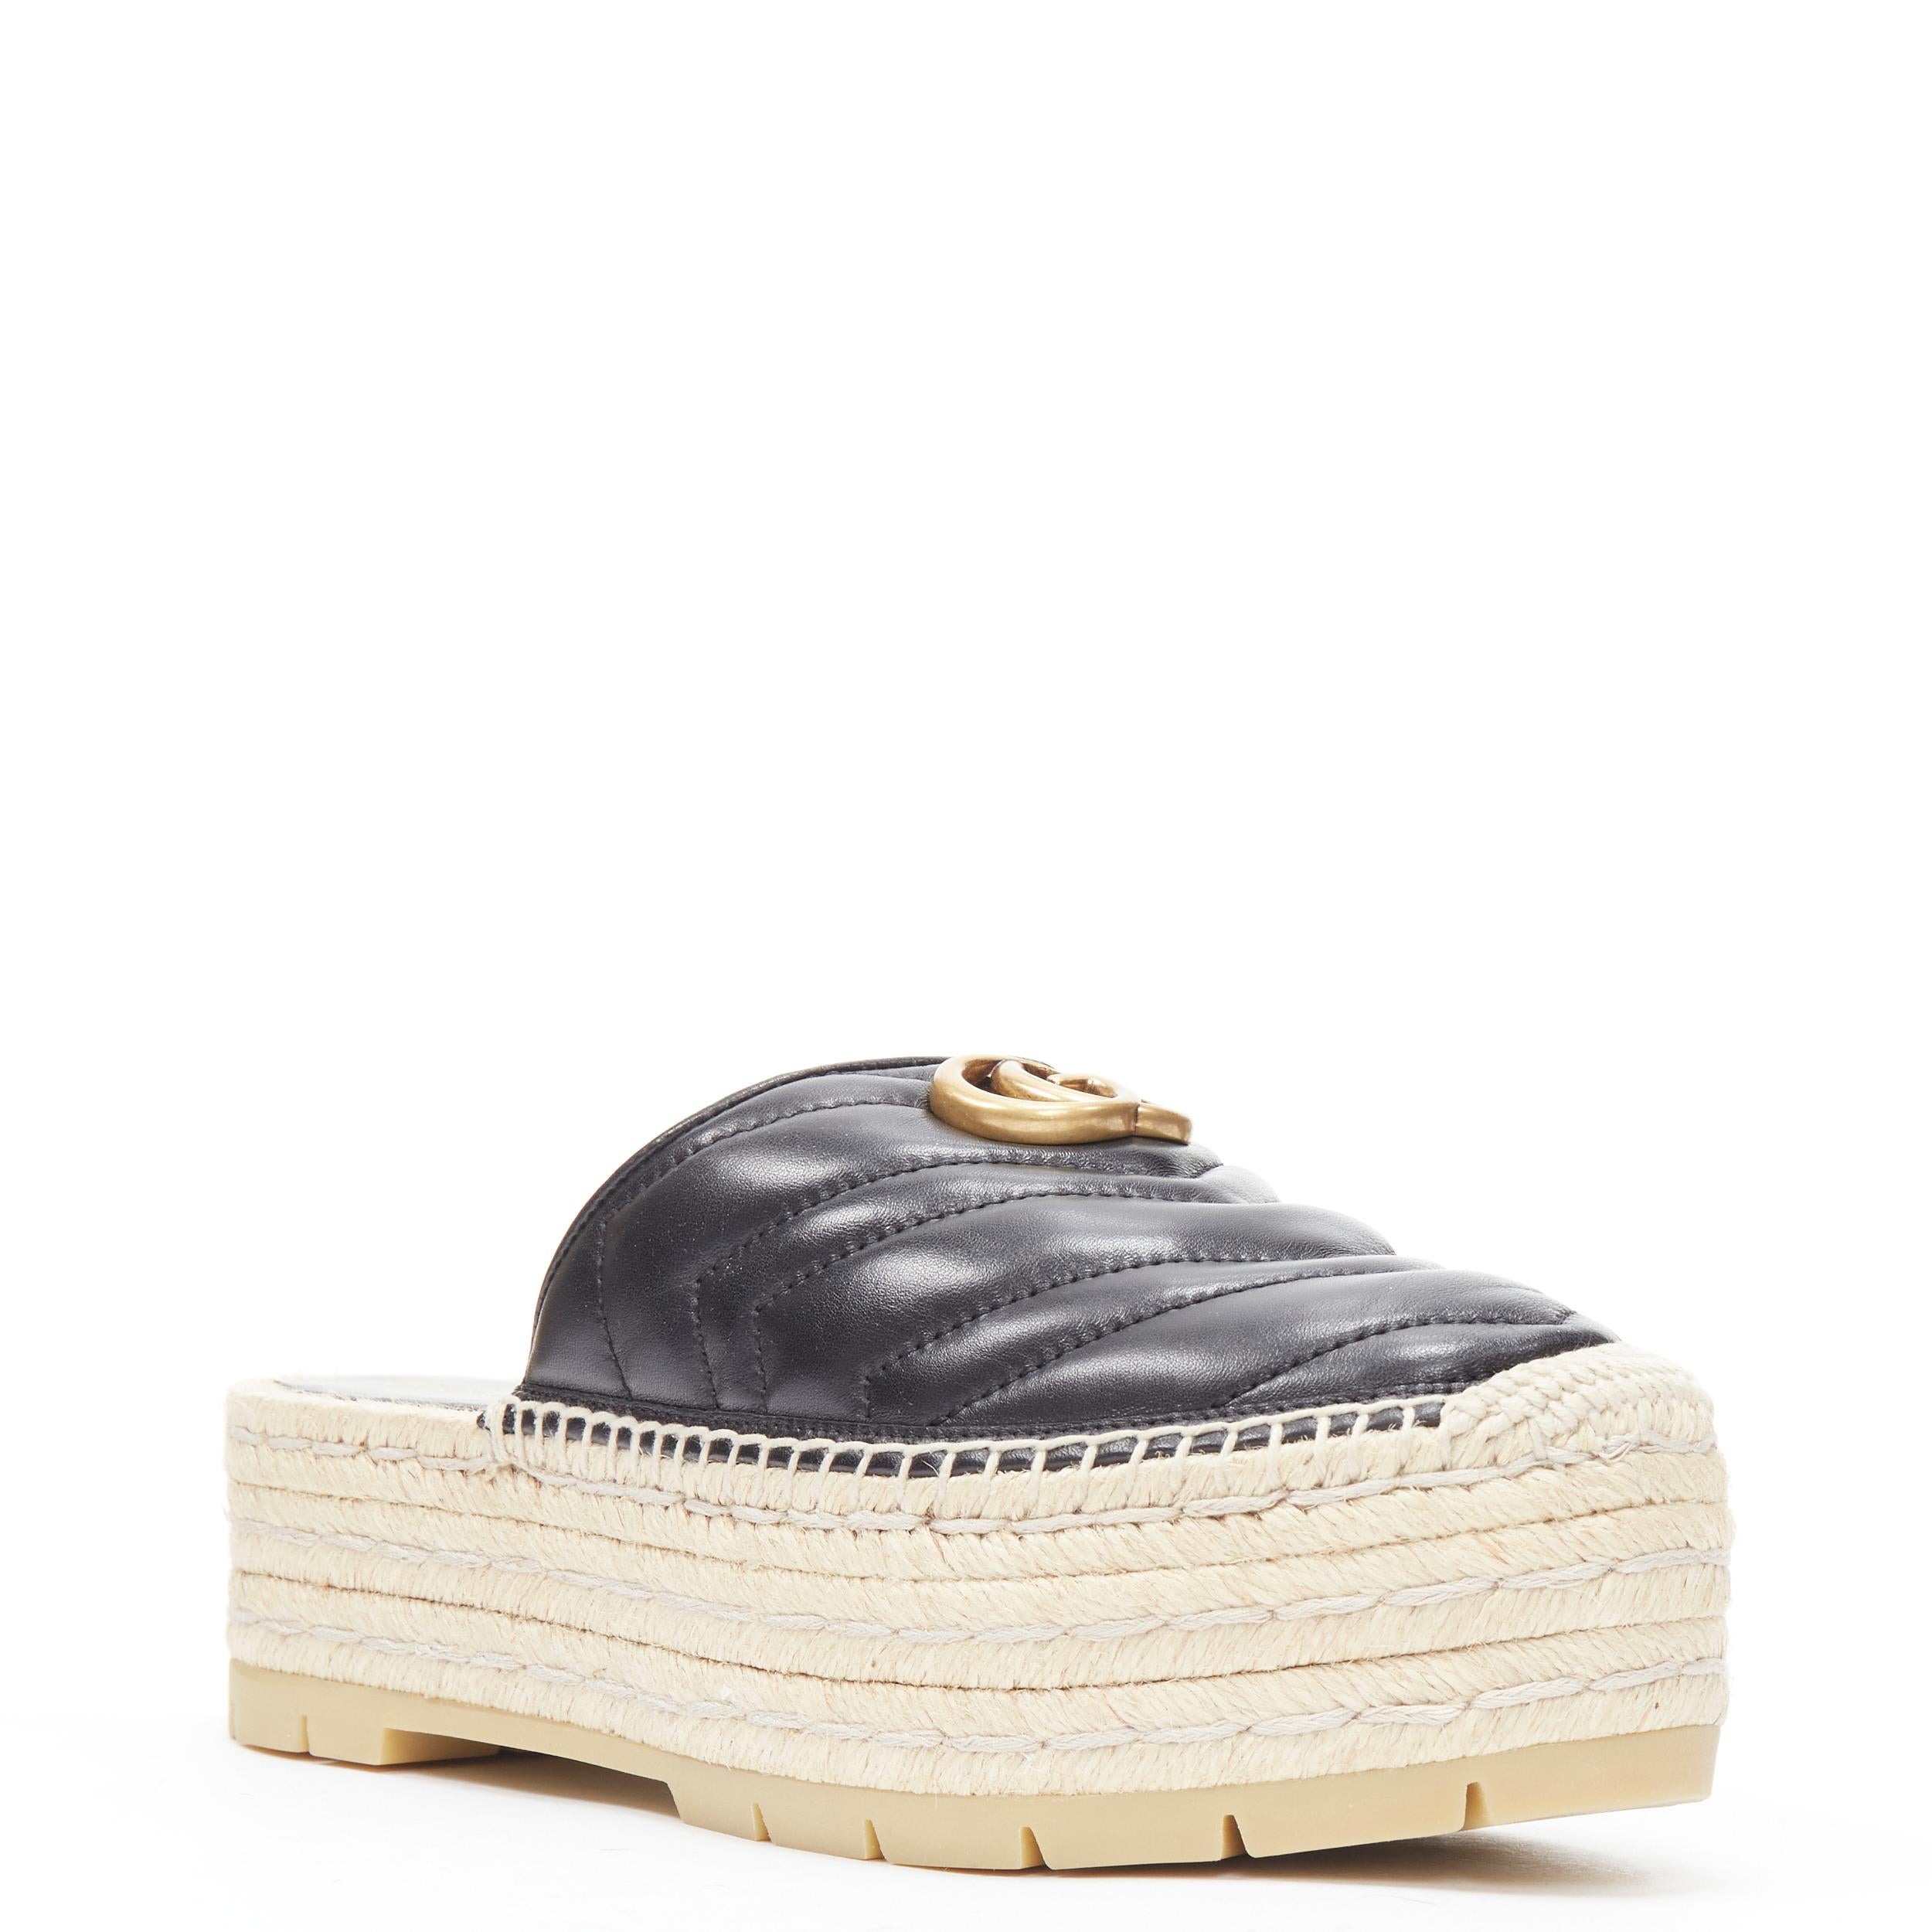 new GUCCI Charlotte Matelasse gold GG logo platform espadrille jute mule EU40 
Reference: TGAS/B02164 
Brand: Gucci 
Designer: Alessandro Michele 
Model: Nappa Charlotte 
Material: Leather 
Color: Black 
Pattern: Solid 
Extra Detail: Nappa